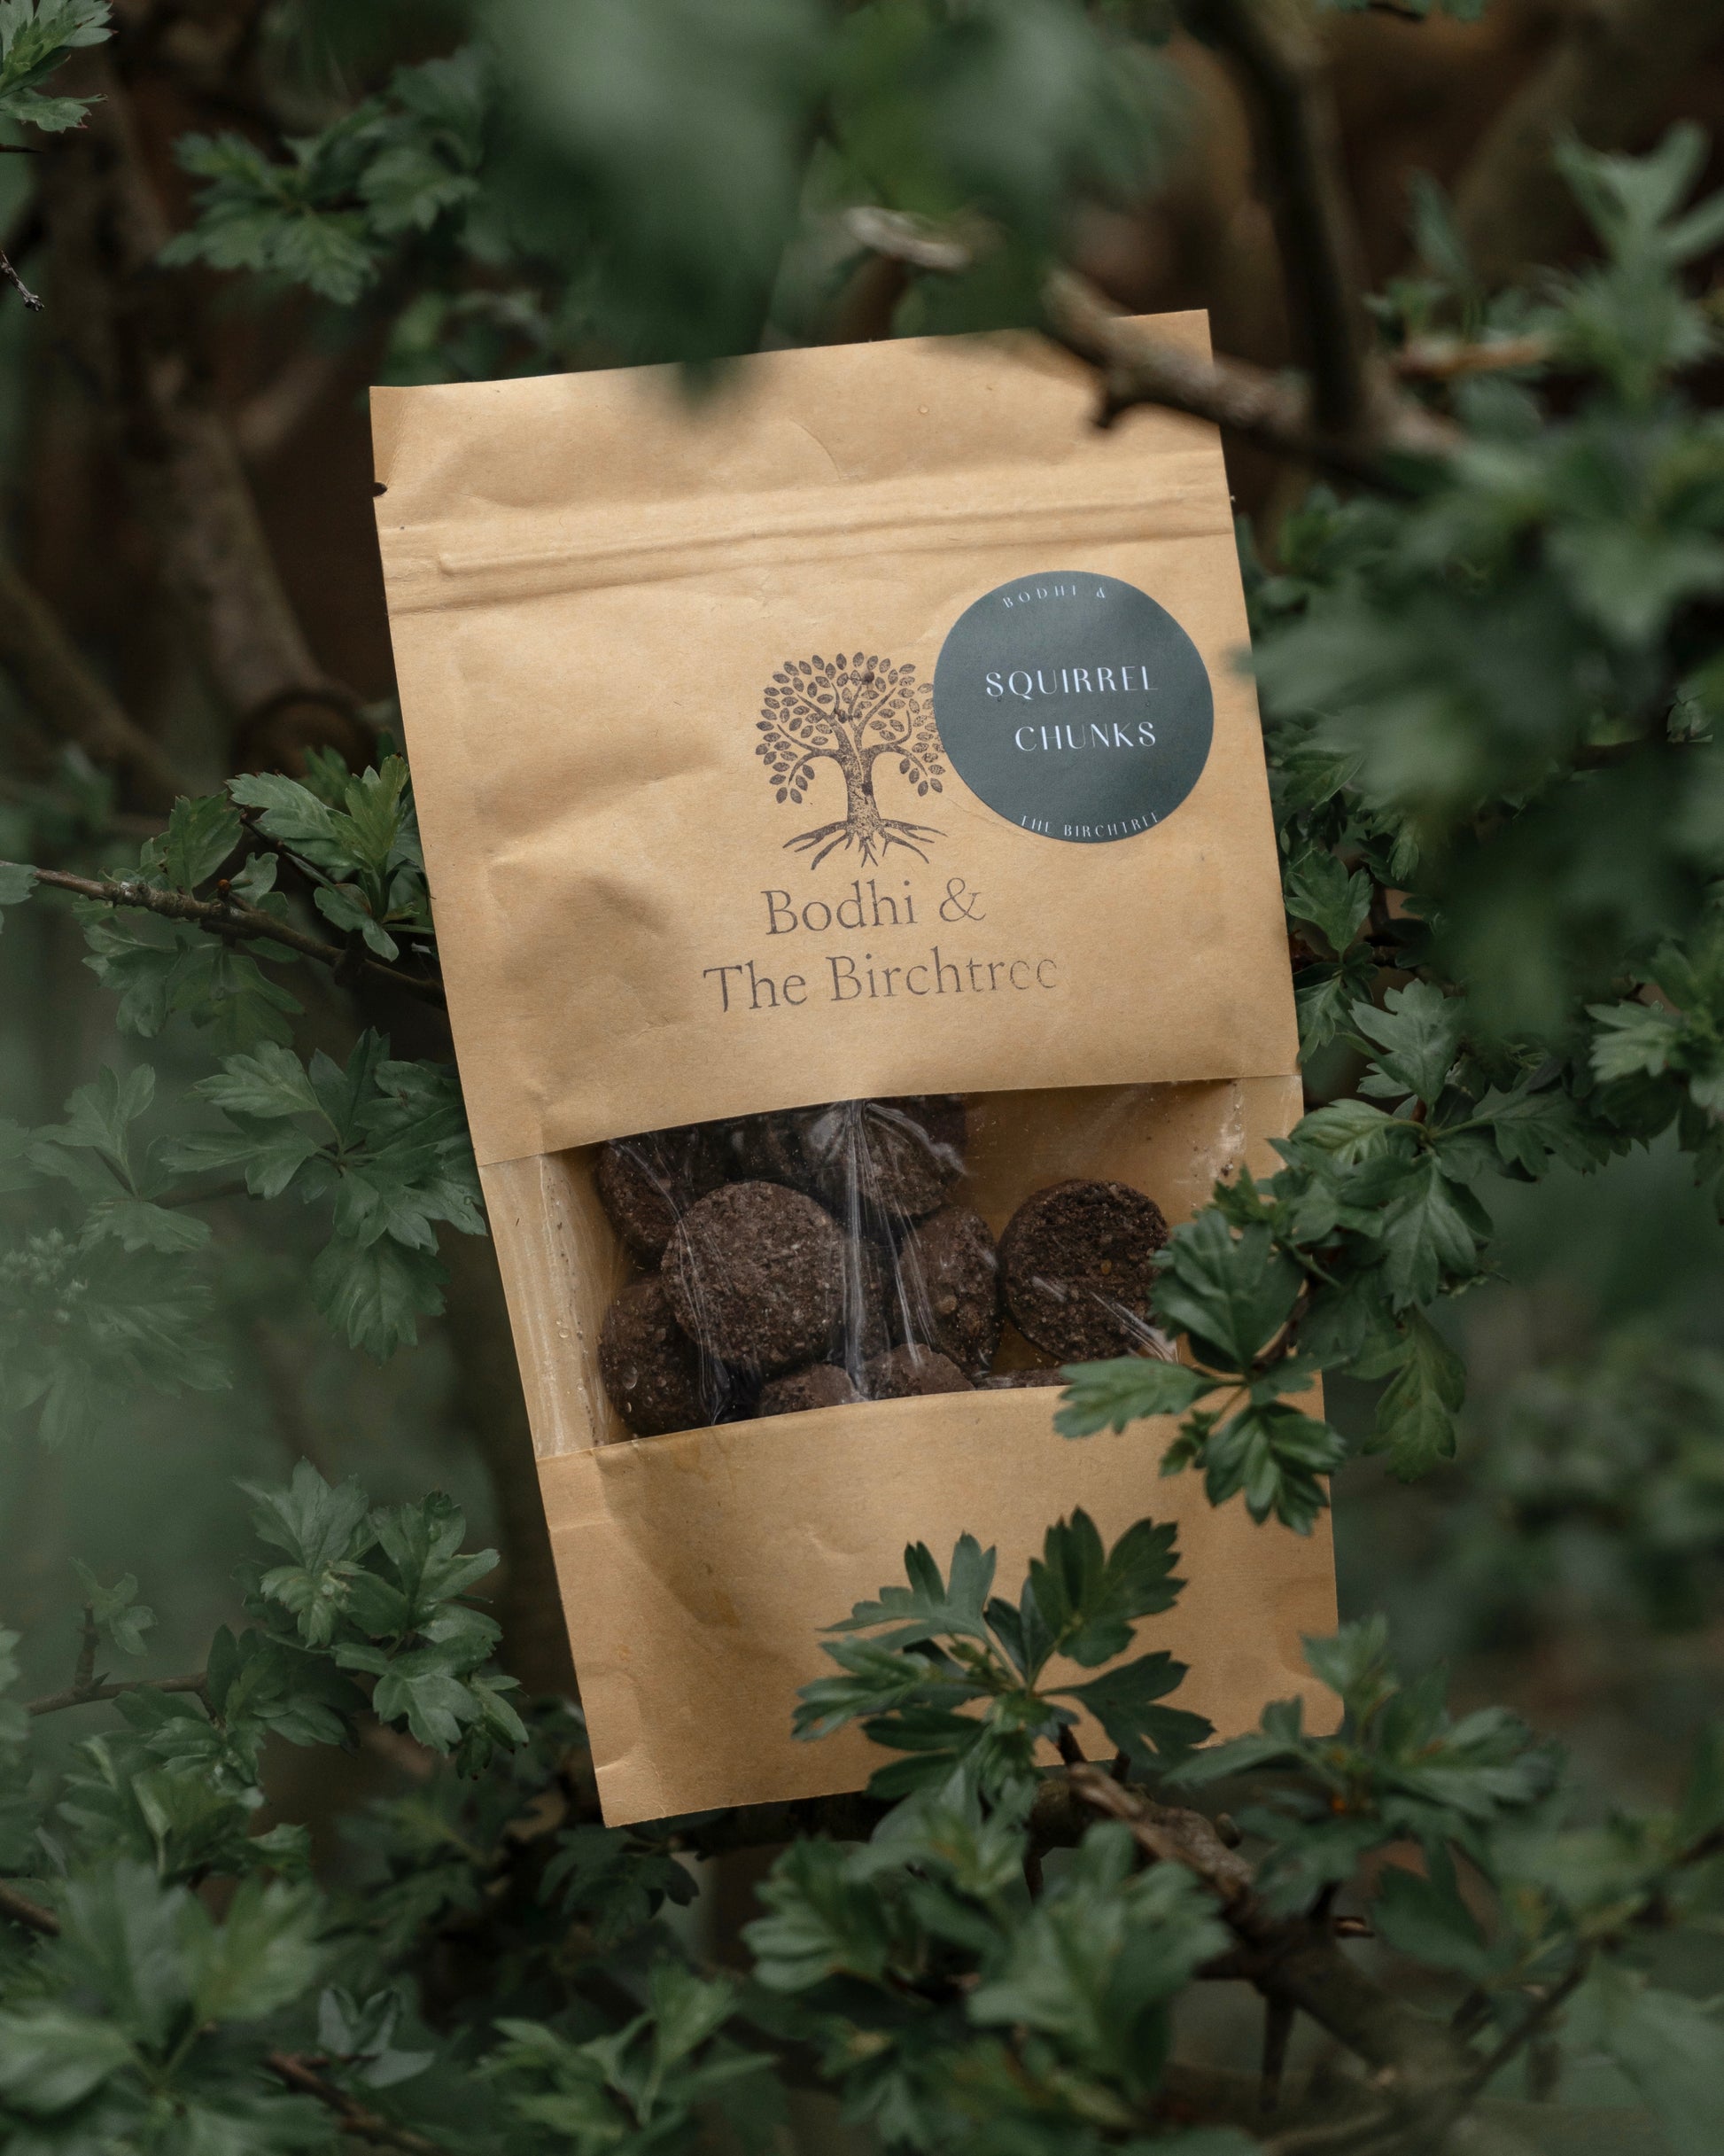 Bodhi & The Birchtree Squirrel Chunks 80g - Bodhi & The Birchtree